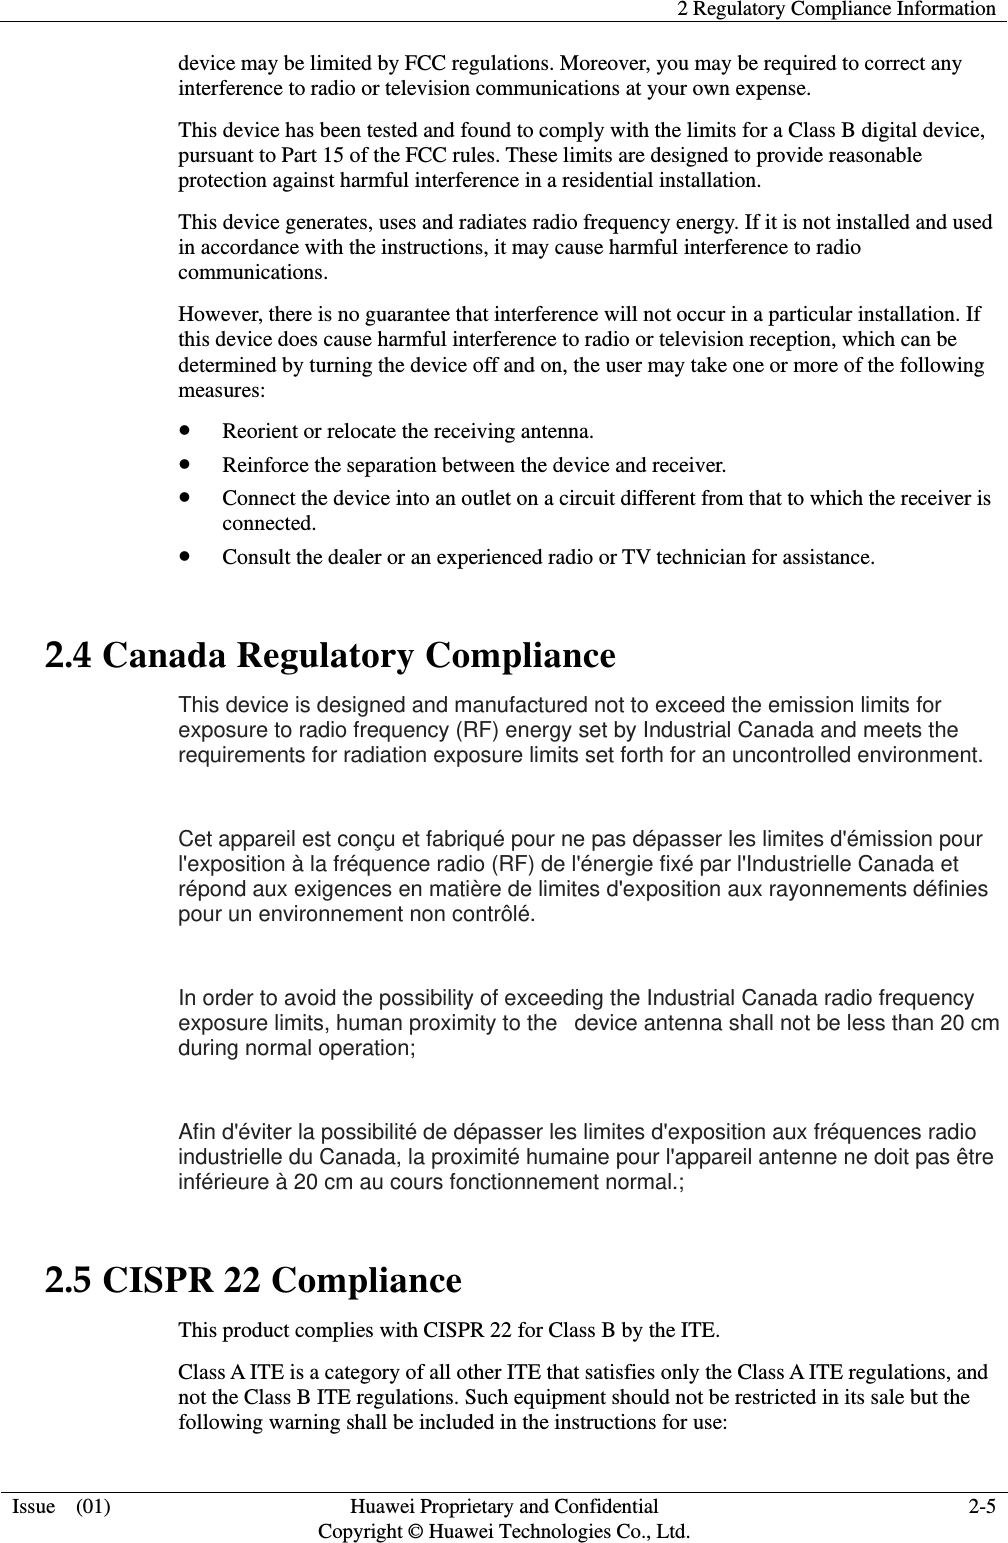    2 Regulatory Compliance Information  Issue  (01)  Huawei Proprietary and Confidential     Copyright © Huawei Technologies Co., Ltd. 2-5 device may be limited by FCC regulations. Moreover, you may be required to correct any interference to radio or television communications at your own expense. This device has been tested and found to comply with the limits for a Class B digital device, pursuant to Part 15 of the FCC rules. These limits are designed to provide reasonable protection against harmful interference in a residential installation. This device generates, uses and radiates radio frequency energy. If it is not installed and used in accordance with the instructions, it may cause harmful interference to radio communications. However, there is no guarantee that interference will not occur in a particular installation. If this device does cause harmful interference to radio or television reception, which can be determined by turning the device off and on, the user may take one or more of the following measures: z Reorient or relocate the receiving antenna. z Reinforce the separation between the device and receiver. z Connect the device into an outlet on a circuit different from that to which the receiver is connected. z Consult the dealer or an experienced radio or TV technician for assistance. 2.4 Canada Regulatory Compliance This device is designed and manufactured not to exceed the emission limits for exposure to radio frequency (RF) energy set by Industrial Canada and meets the requirements for radiation exposure limits set forth for an uncontrolled environment.    Cet appareil est conçu et fabriqué pour ne pas dépasser les limites d&apos;émission pour l&apos;exposition à la fréquence radio (RF) de l&apos;énergie fixé par l&apos;Industrielle Canada et répond aux exigences en matière de limites d&apos;exposition aux rayonnements définies pour un environnement non contrôlé.    In order to avoid the possibility of exceeding the Industrial Canada radio frequency exposure limits, human proximity to the   device antenna shall not be less than 20 cm during normal operation;    Afin d&apos;éviter la possibilité de dépasser les limites d&apos;exposition aux fréquences radio industrielle du Canada, la proximité humaine pour l&apos;appareil antenne ne doit pas être inférieure à 20 cm au cours fonctionnement normal.;   2.5 CISPR 22 Compliance This product complies with CISPR 22 for Class B by the ITE. Class A ITE is a category of all other ITE that satisfies only the Class A ITE regulations, and not the Class B ITE regulations. Such equipment should not be restricted in its sale but the following warning shall be included in the instructions for use: 